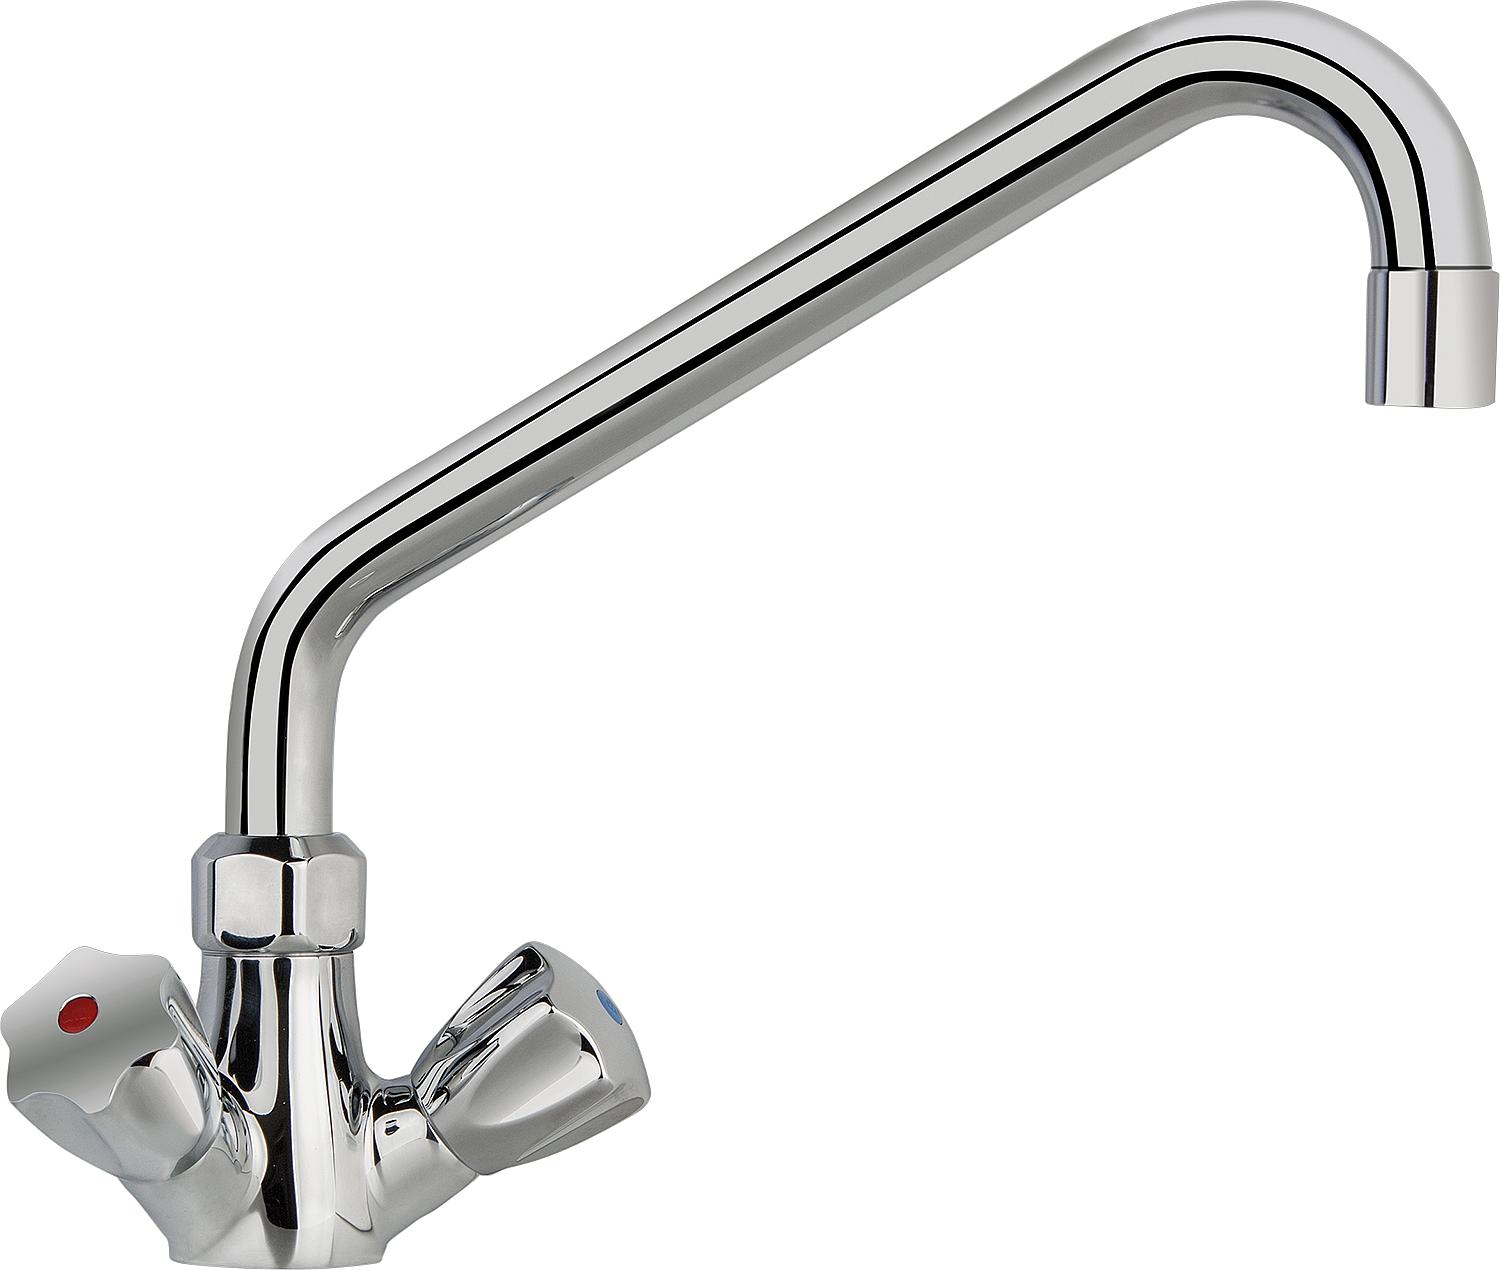 asdec life ® two-handle sink mixer KWC Gastro professional kitchen, chrome projection 300mm